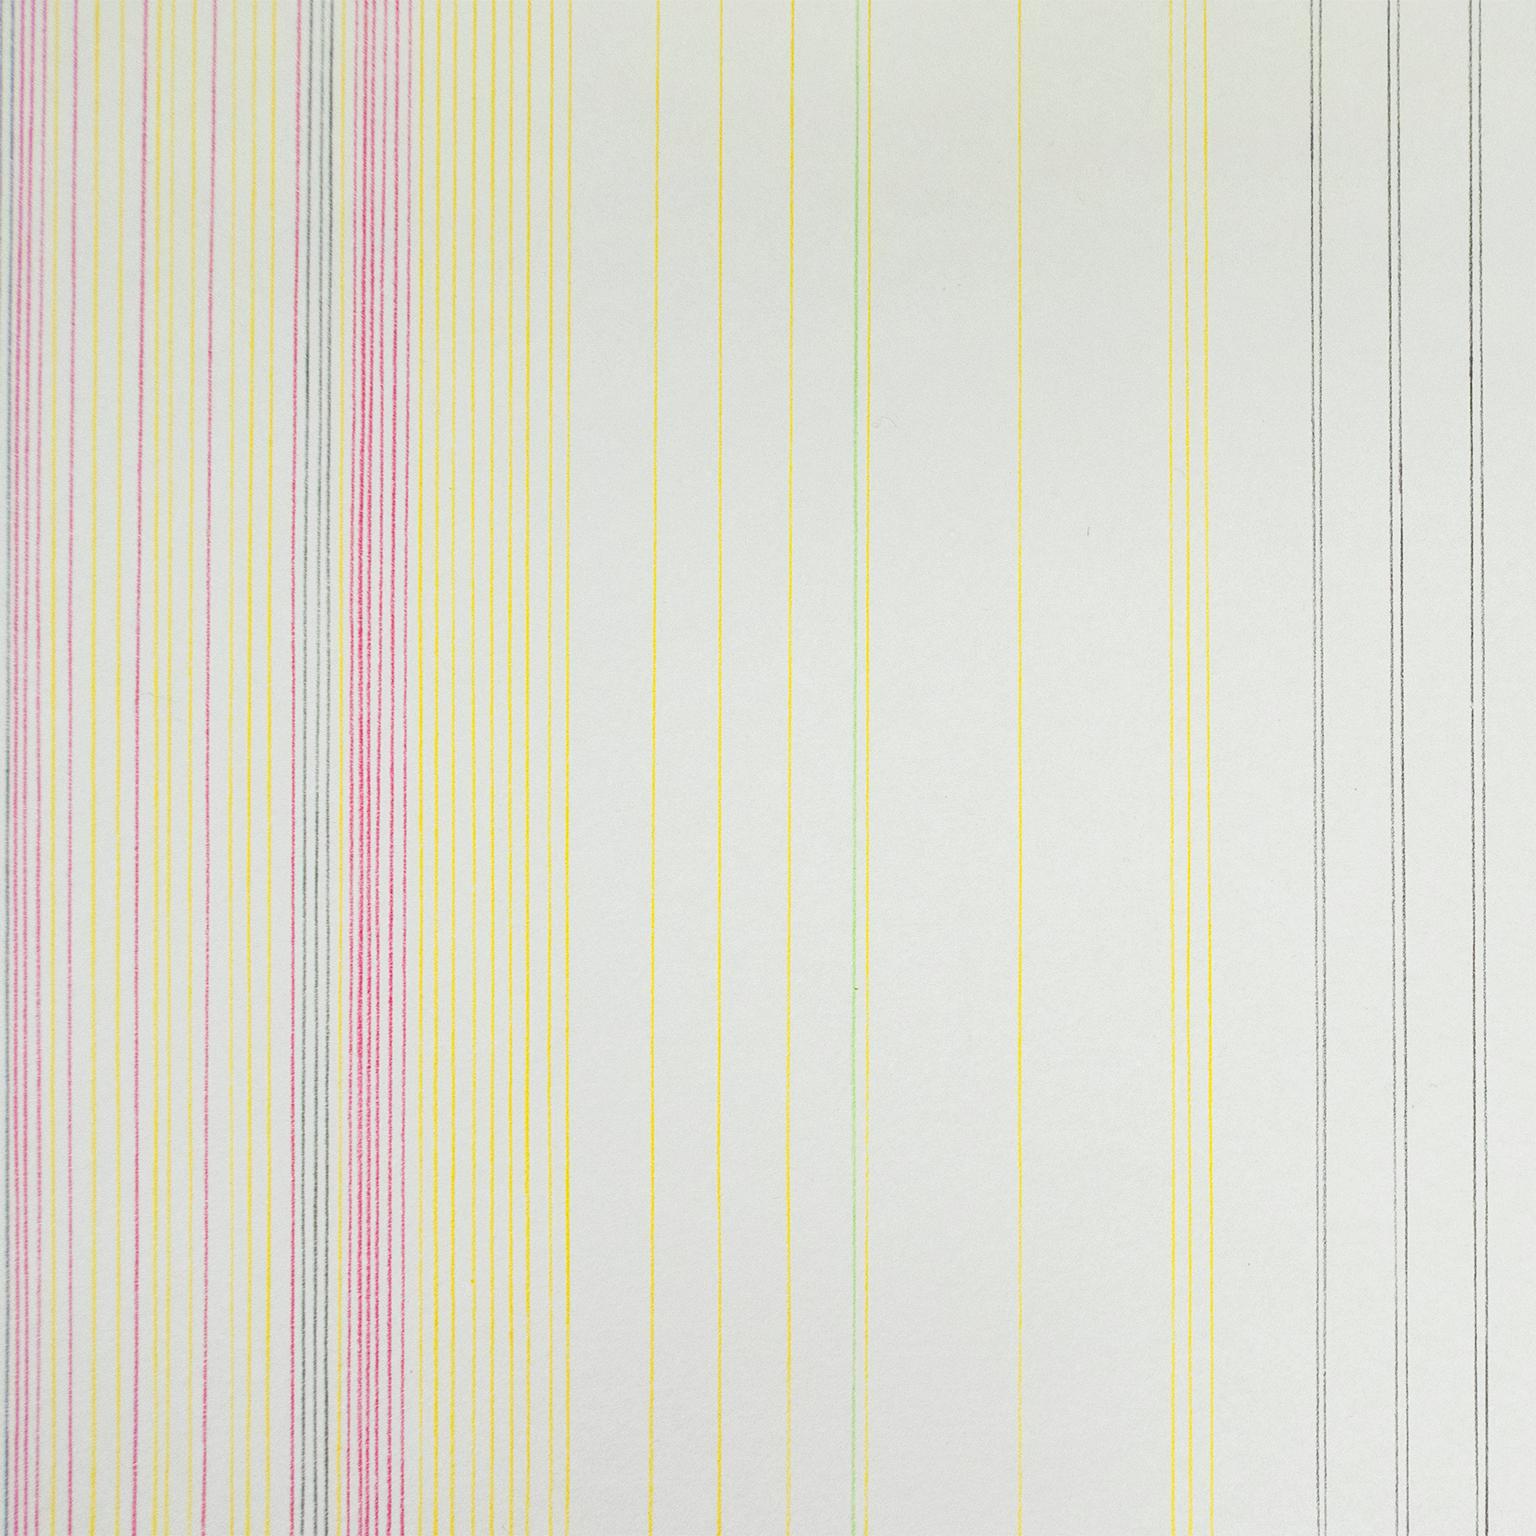 Tightrope: abstract modern minimalist color field drawing with rainbow colors - Abstract Print by Gene Davis